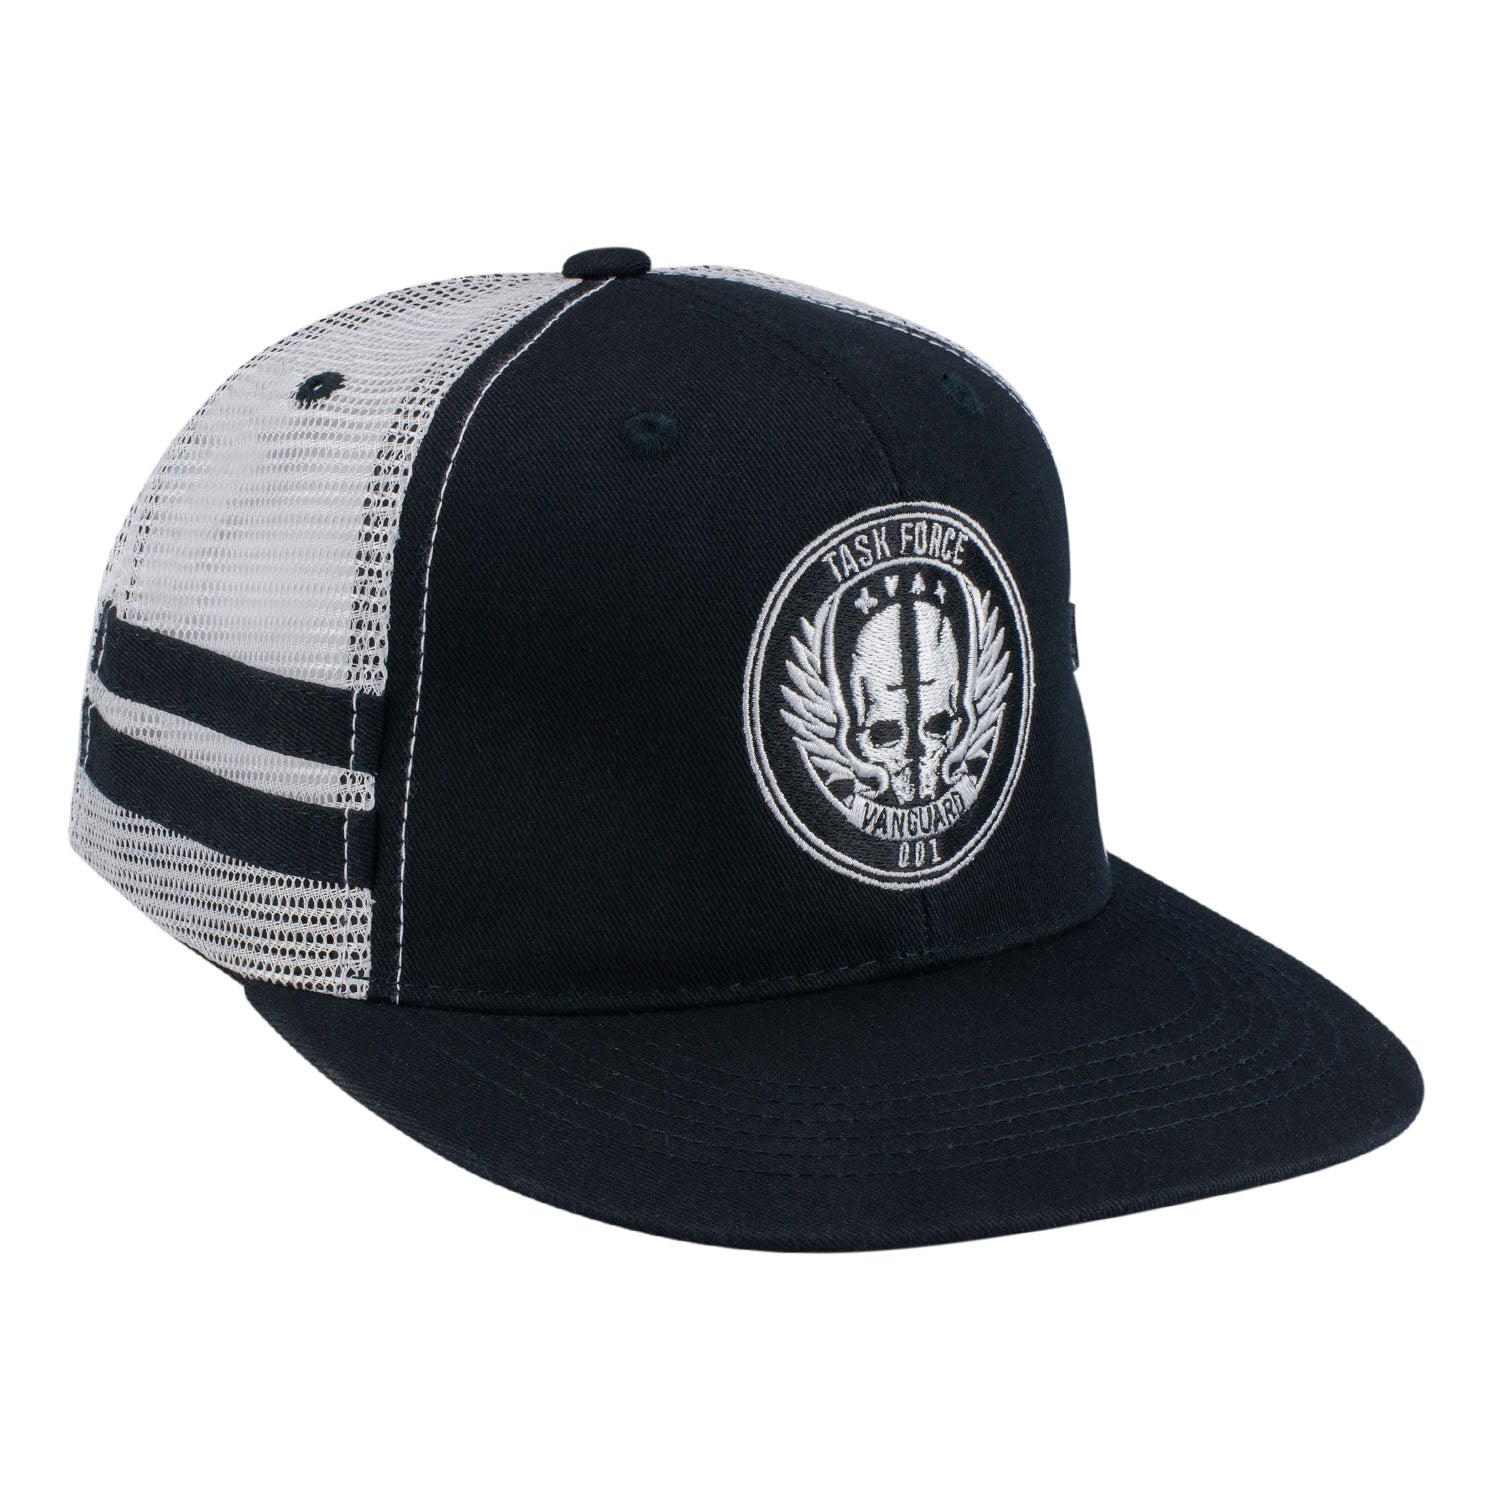 Call of Duty Black Task Force Snapback Hat - Right View